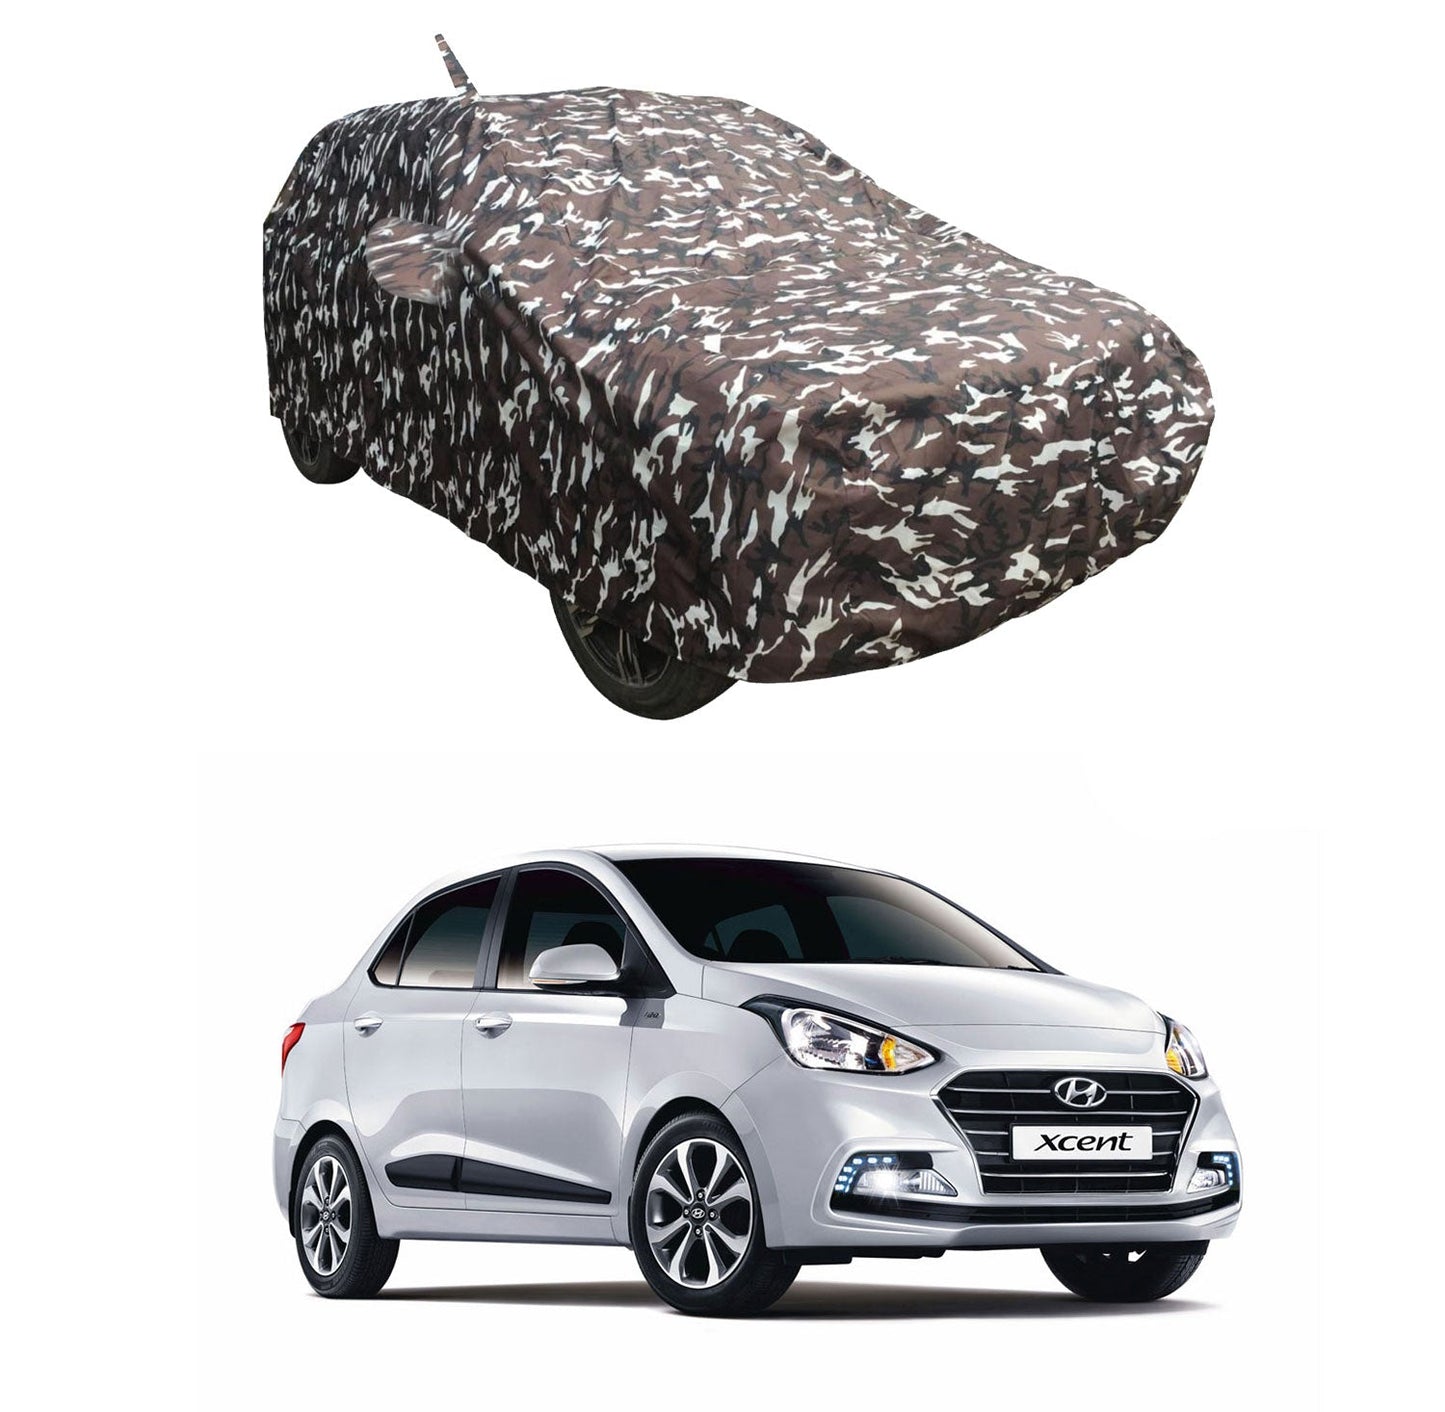 Oshotto Ranger Design Made of 100% Waterproof Fabric Car Body Cover with Mirror Pockets For Hyundai Xcent (with Antenna Pocket)